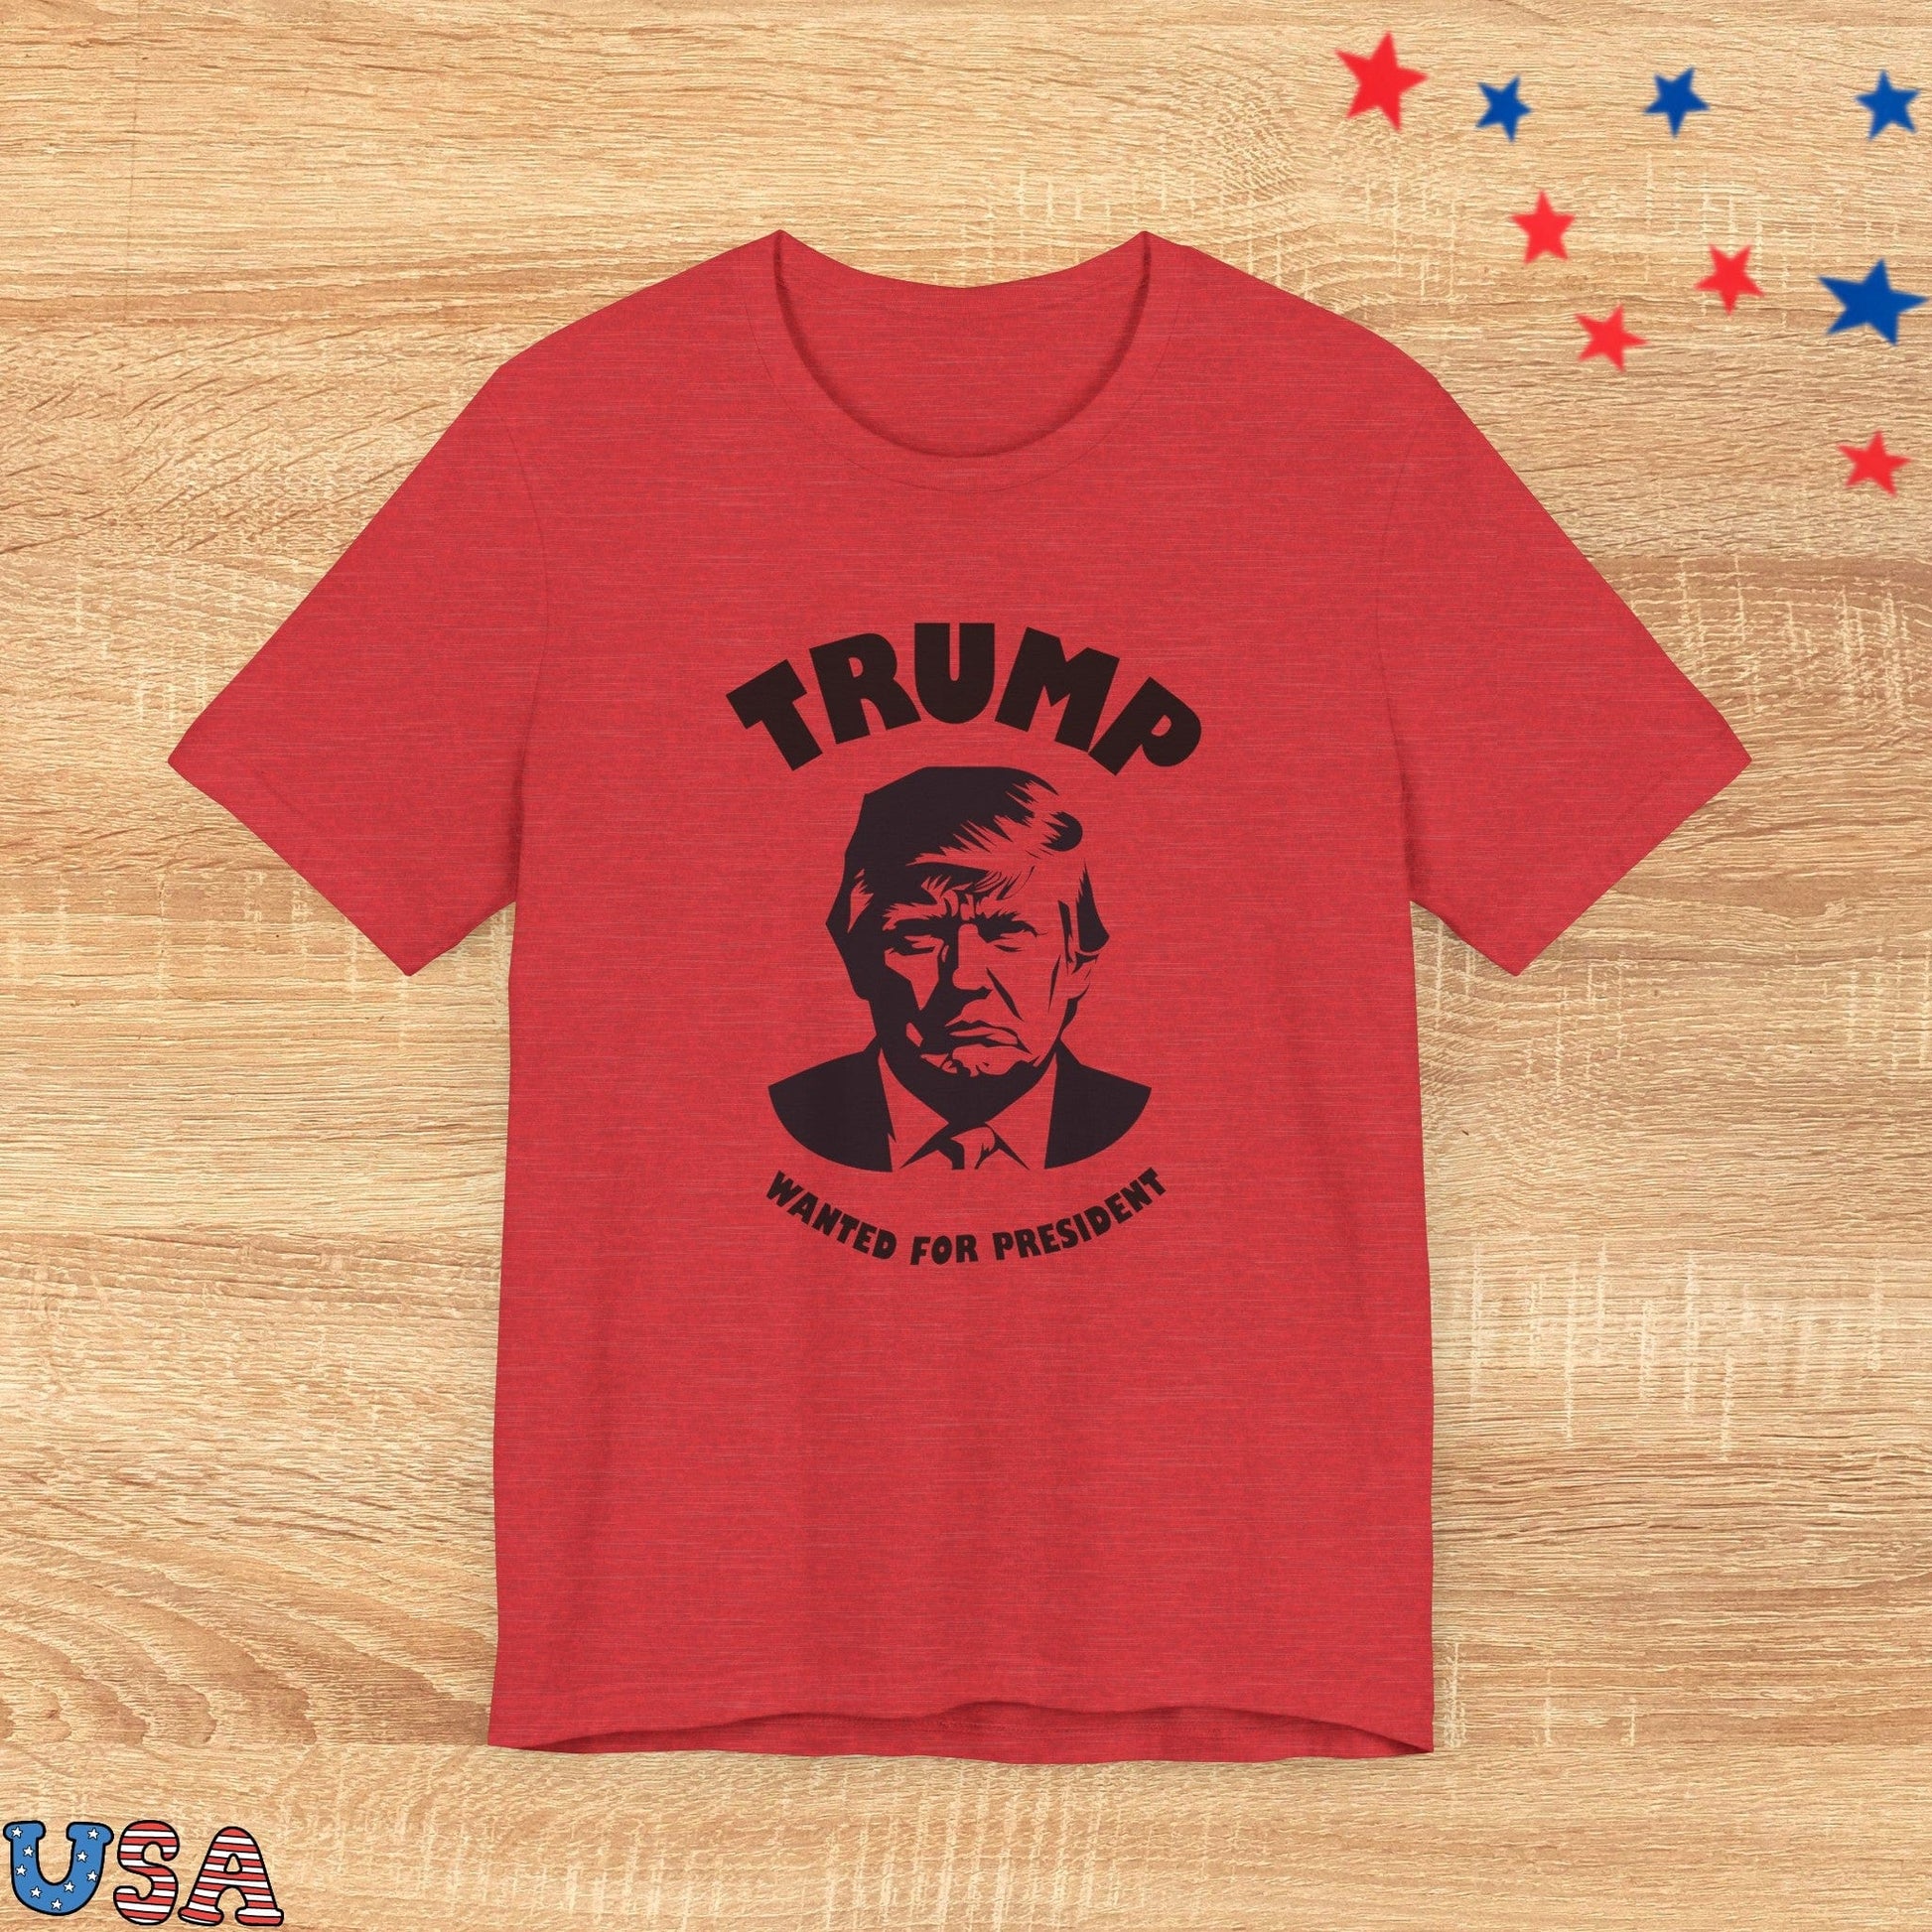 patriotic stars T-Shirt Heather Red / XS Trump Wanted For President